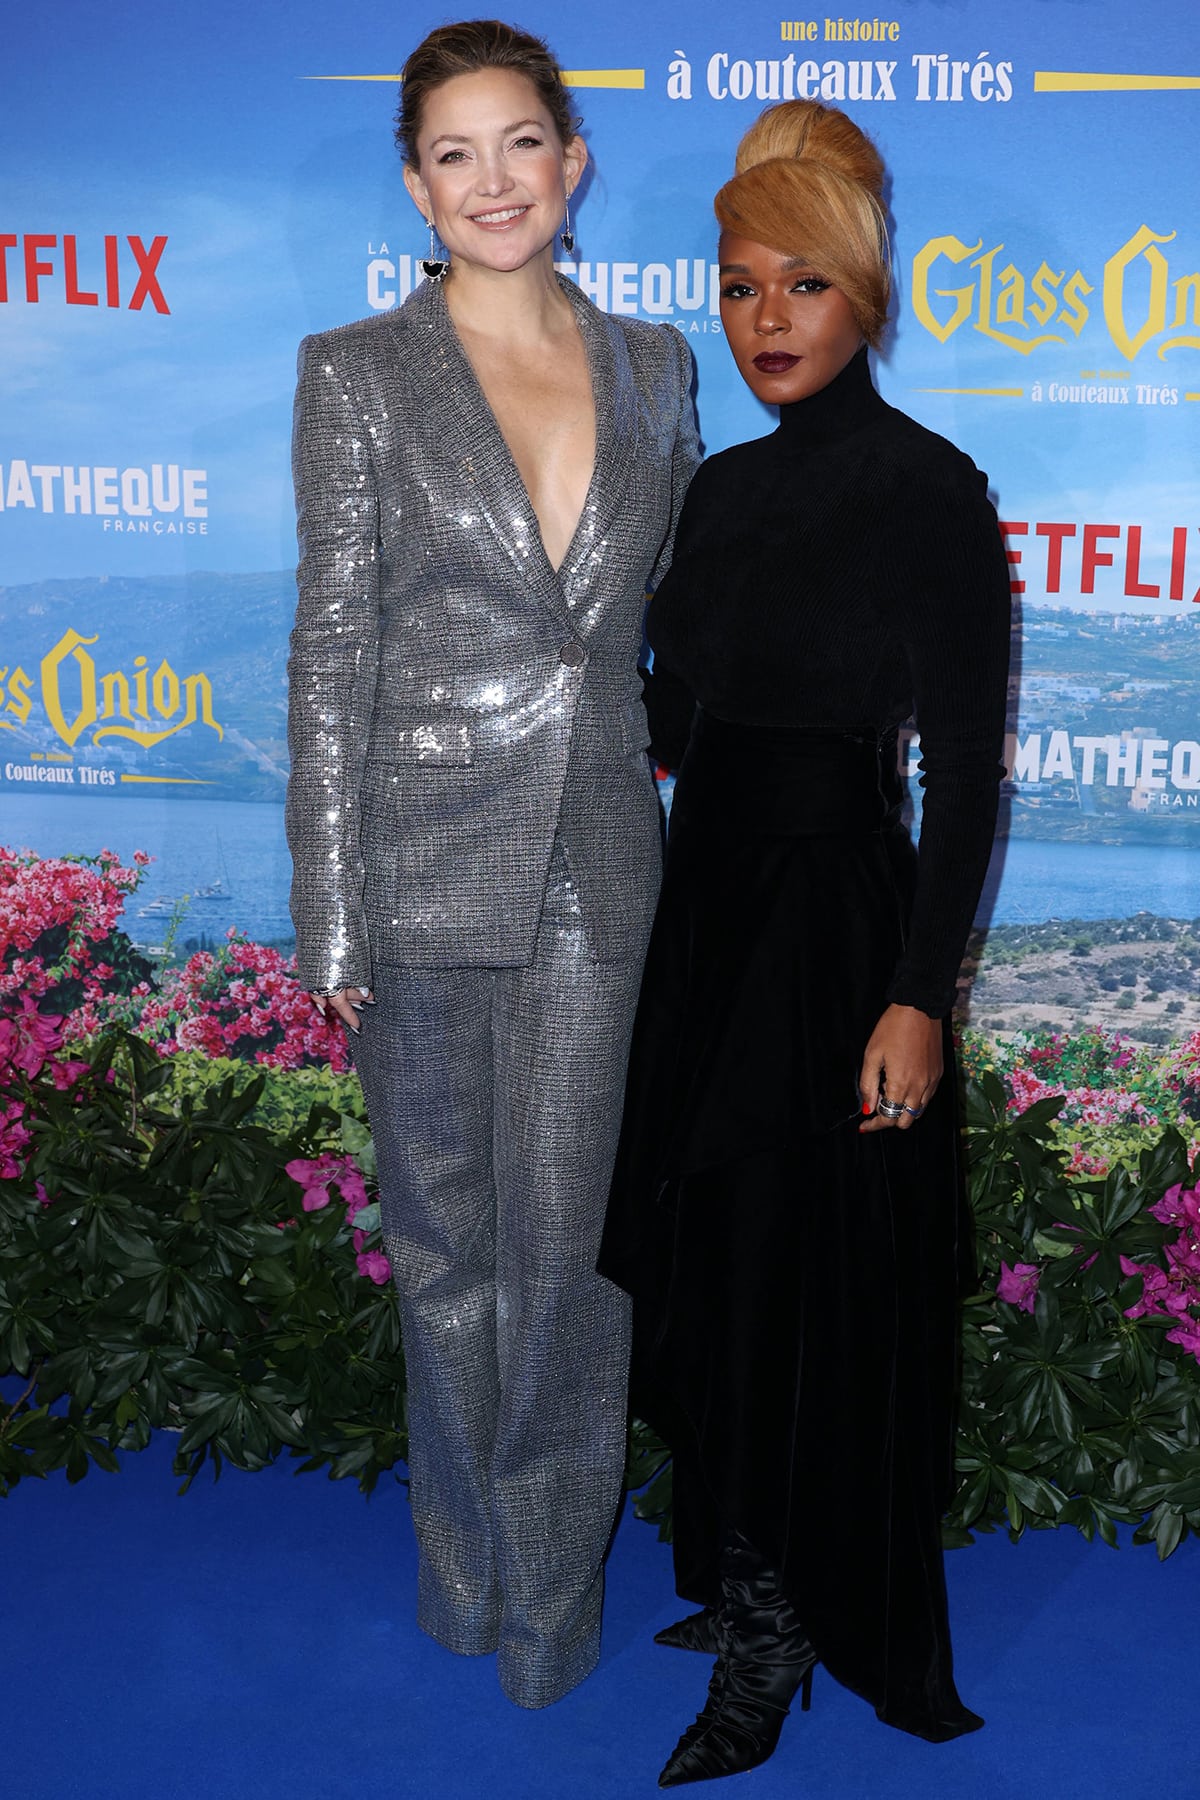 Kate Hudson poses with Janelle Monae in a silver sequin co-ord suit by Pamela Rolland